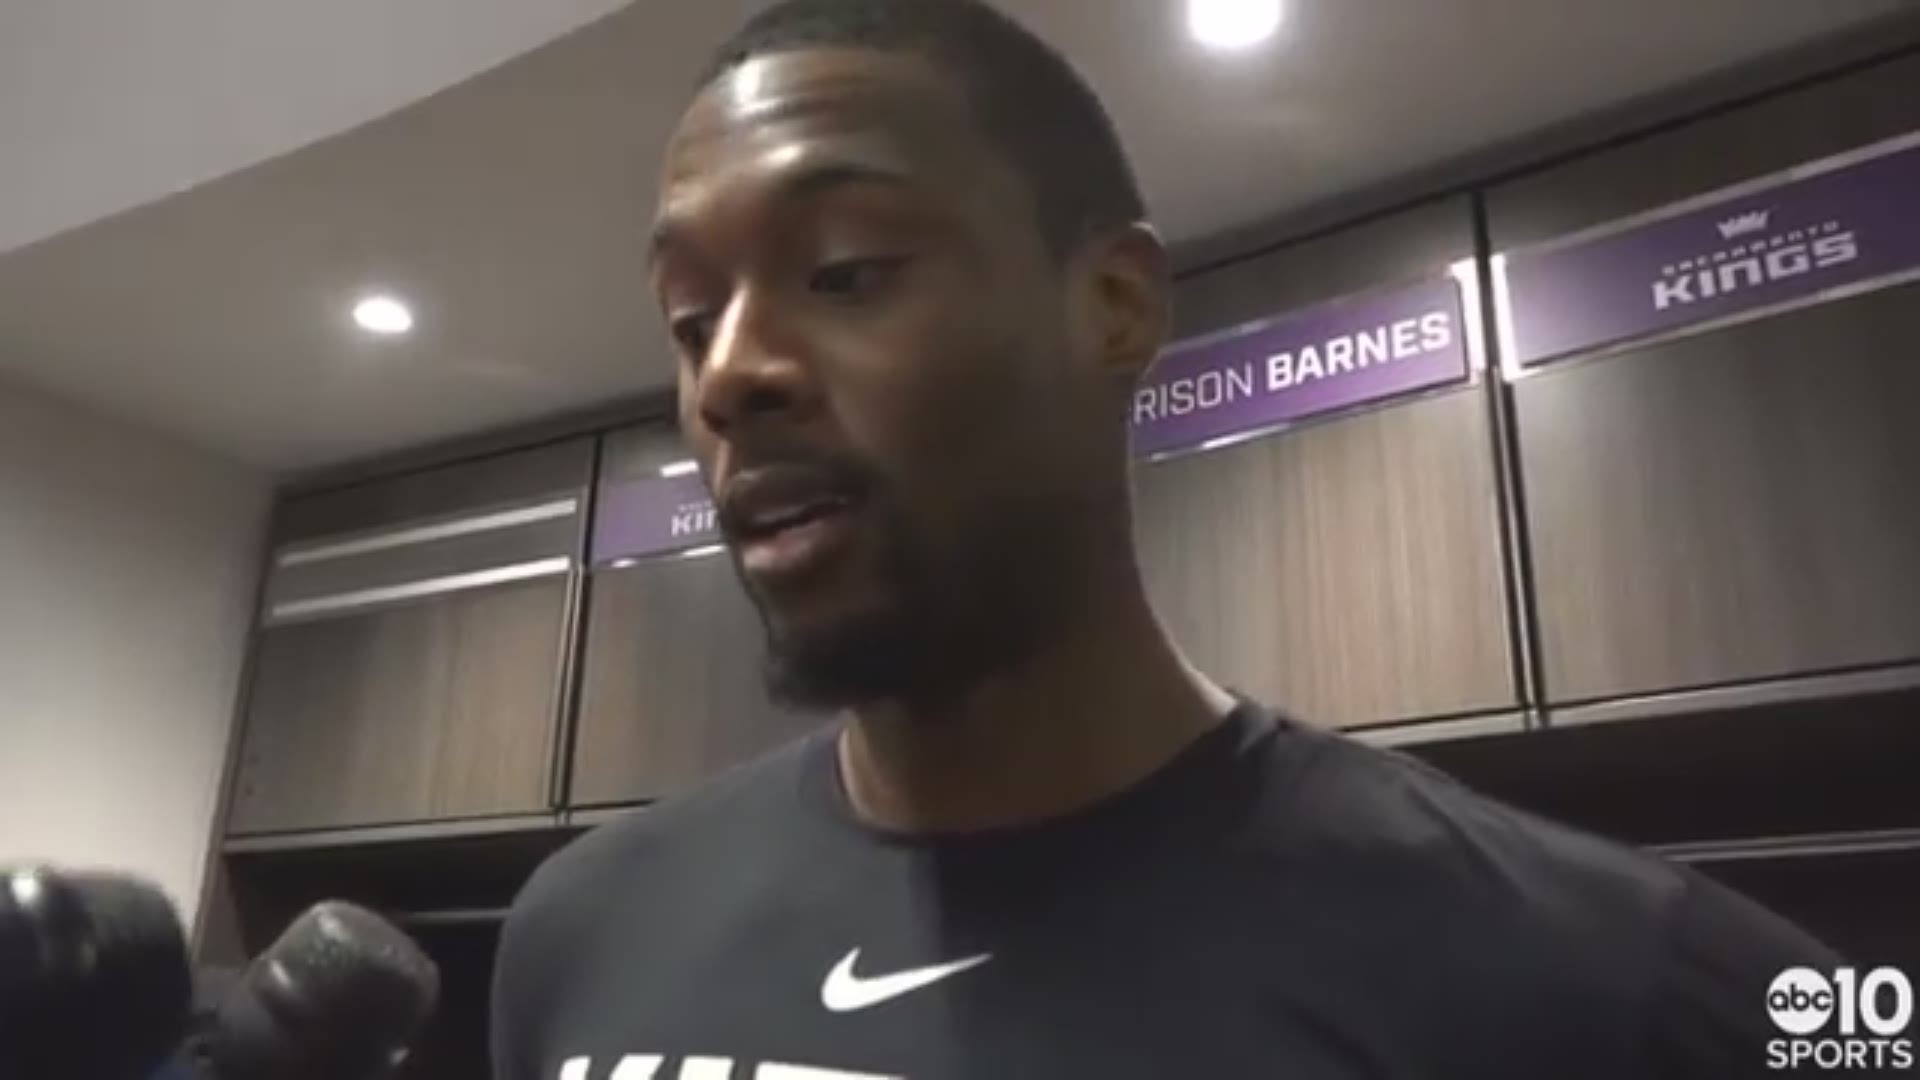 Harrison Barnes talks about making his debut for the Kings on Friday night in front of a sold out Sacramento crowd, being inserted into the starting lineup and his performance in the 102-96 victory over Dwyane Wade and the Miami Heat.